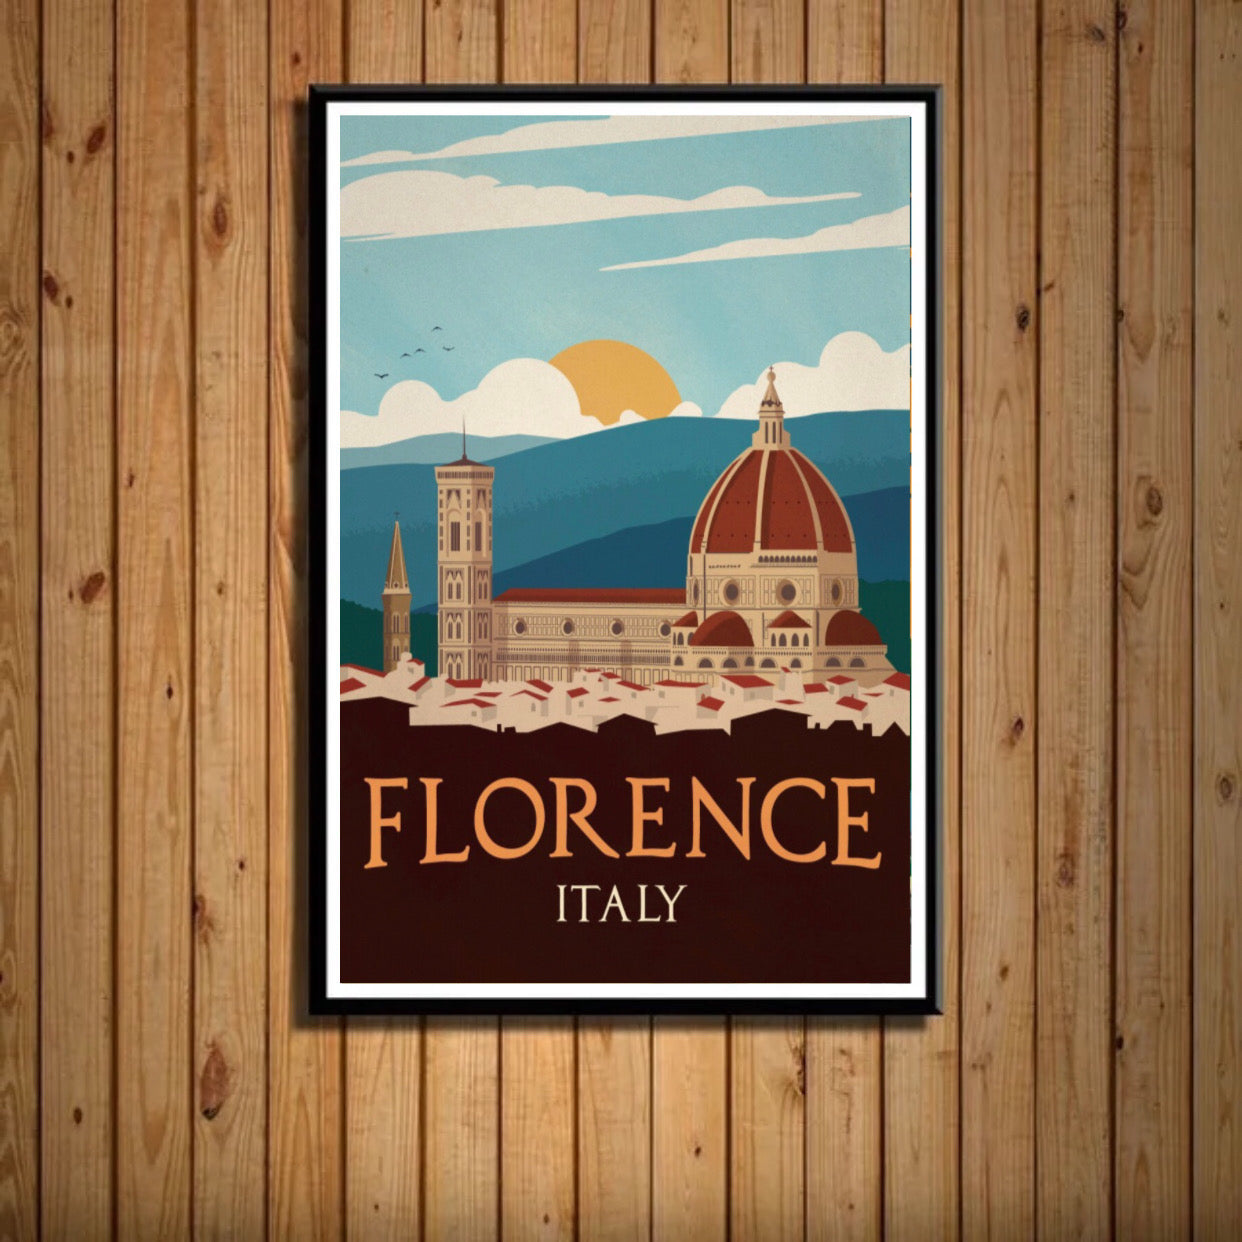 florence, italy poster